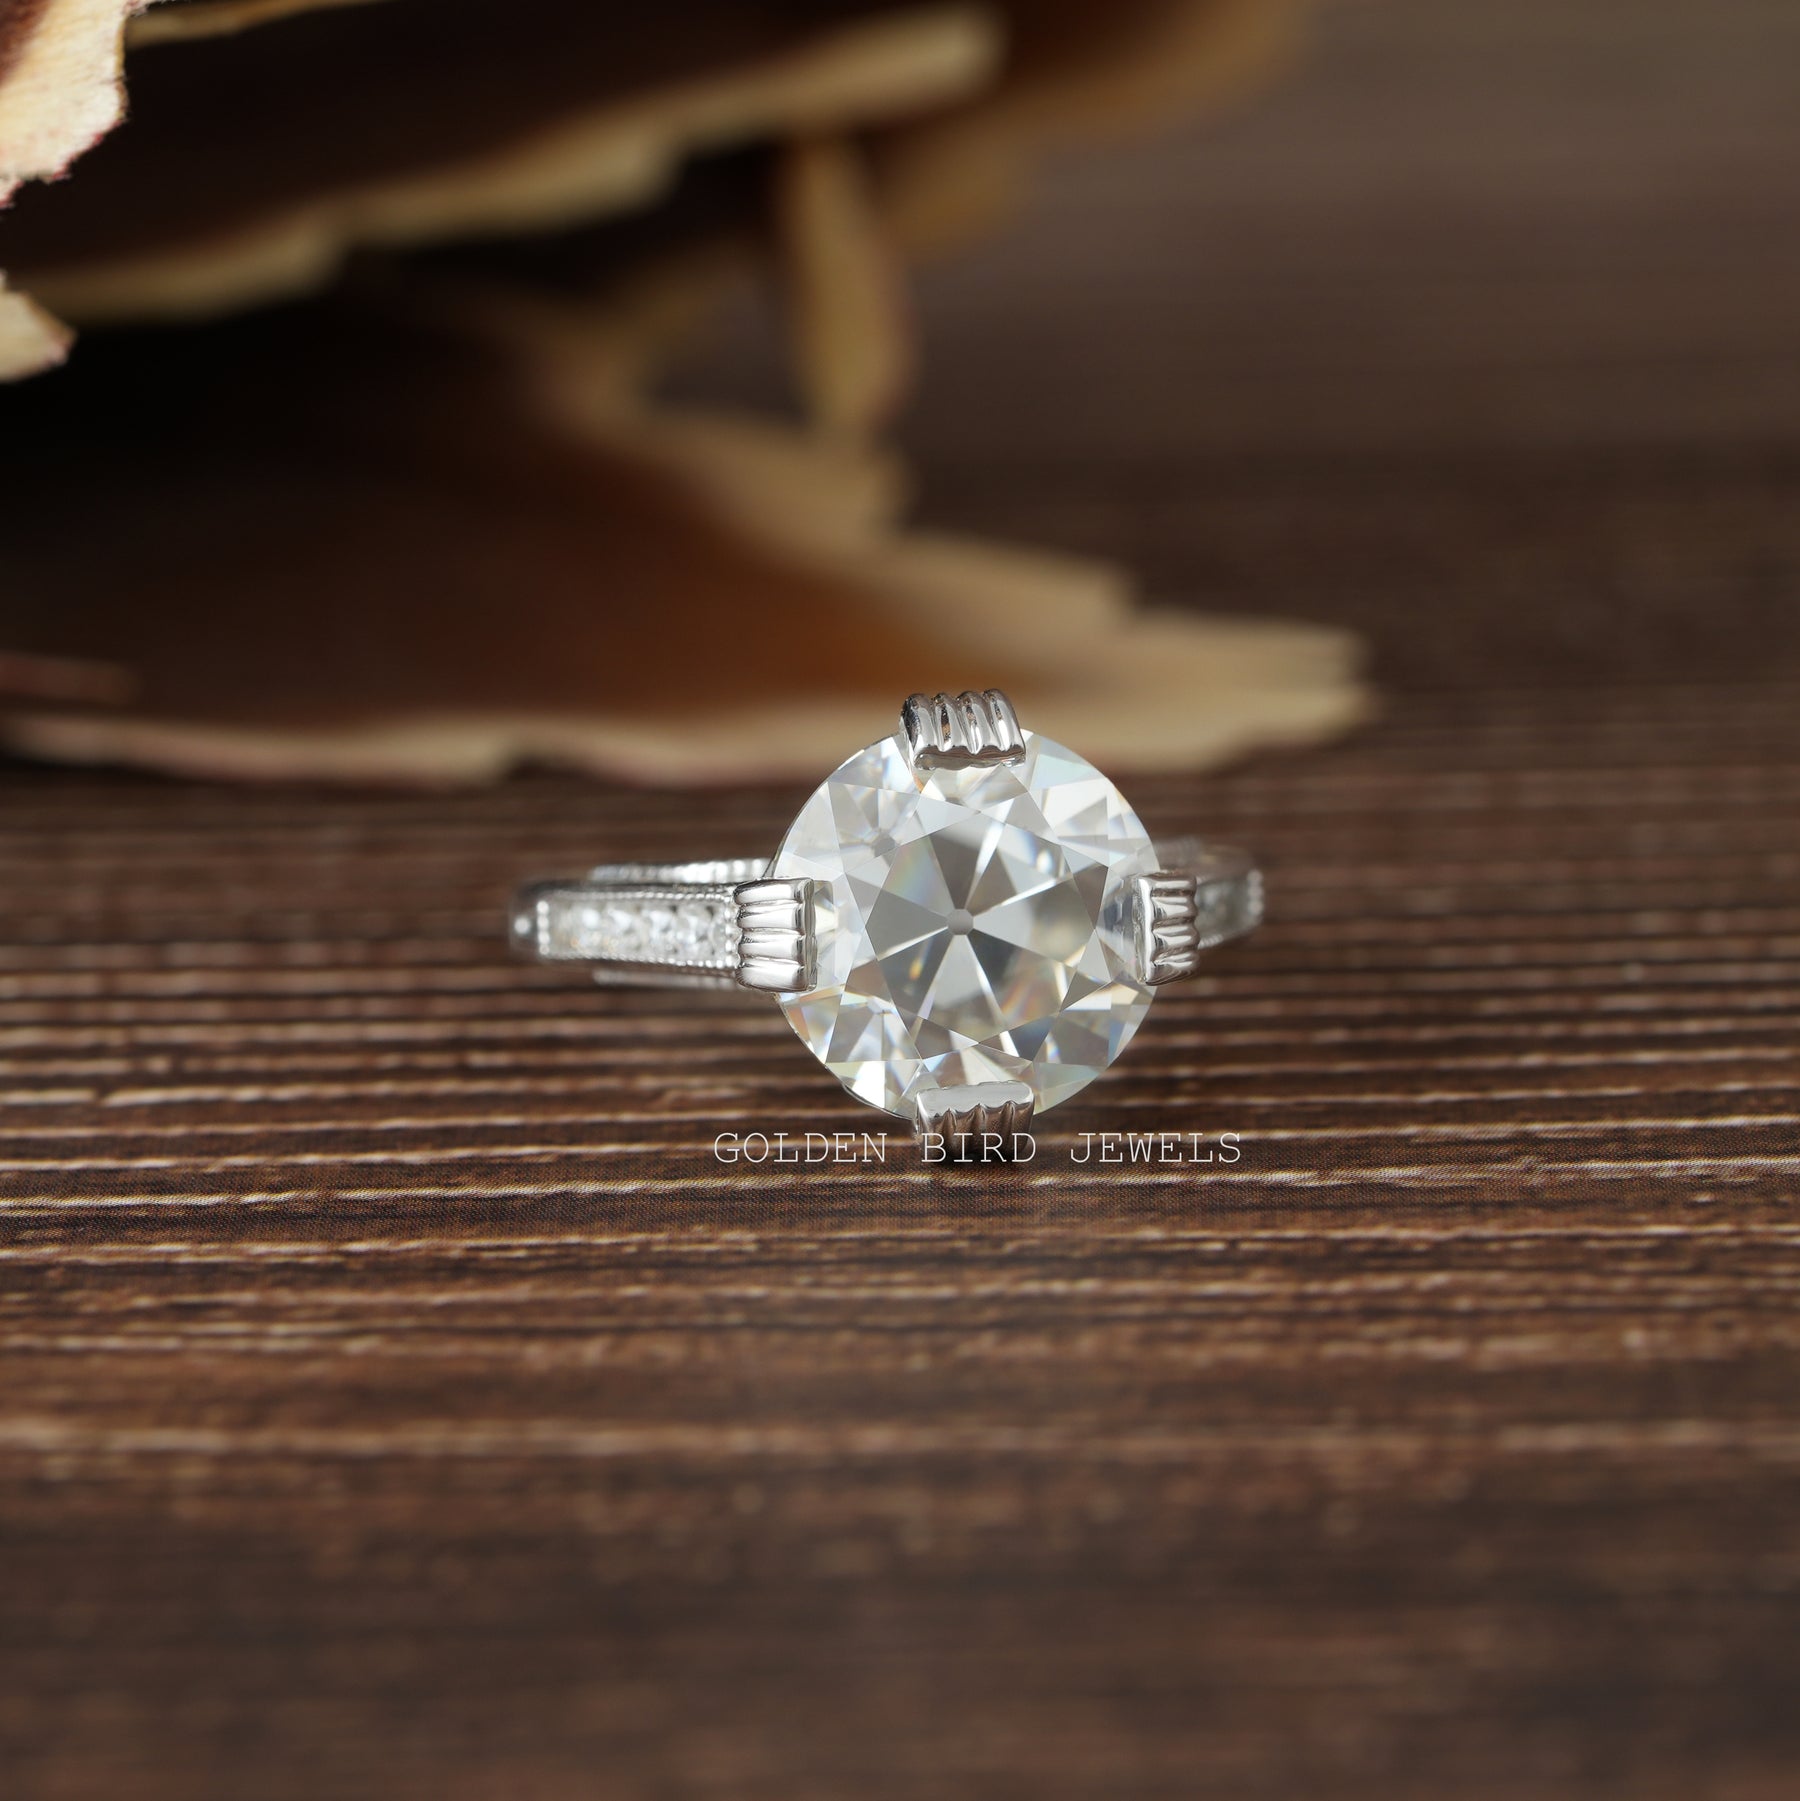 [This moissanite vintage style engagement ring set in round cut side stones]-[Golden Bird Jewels]